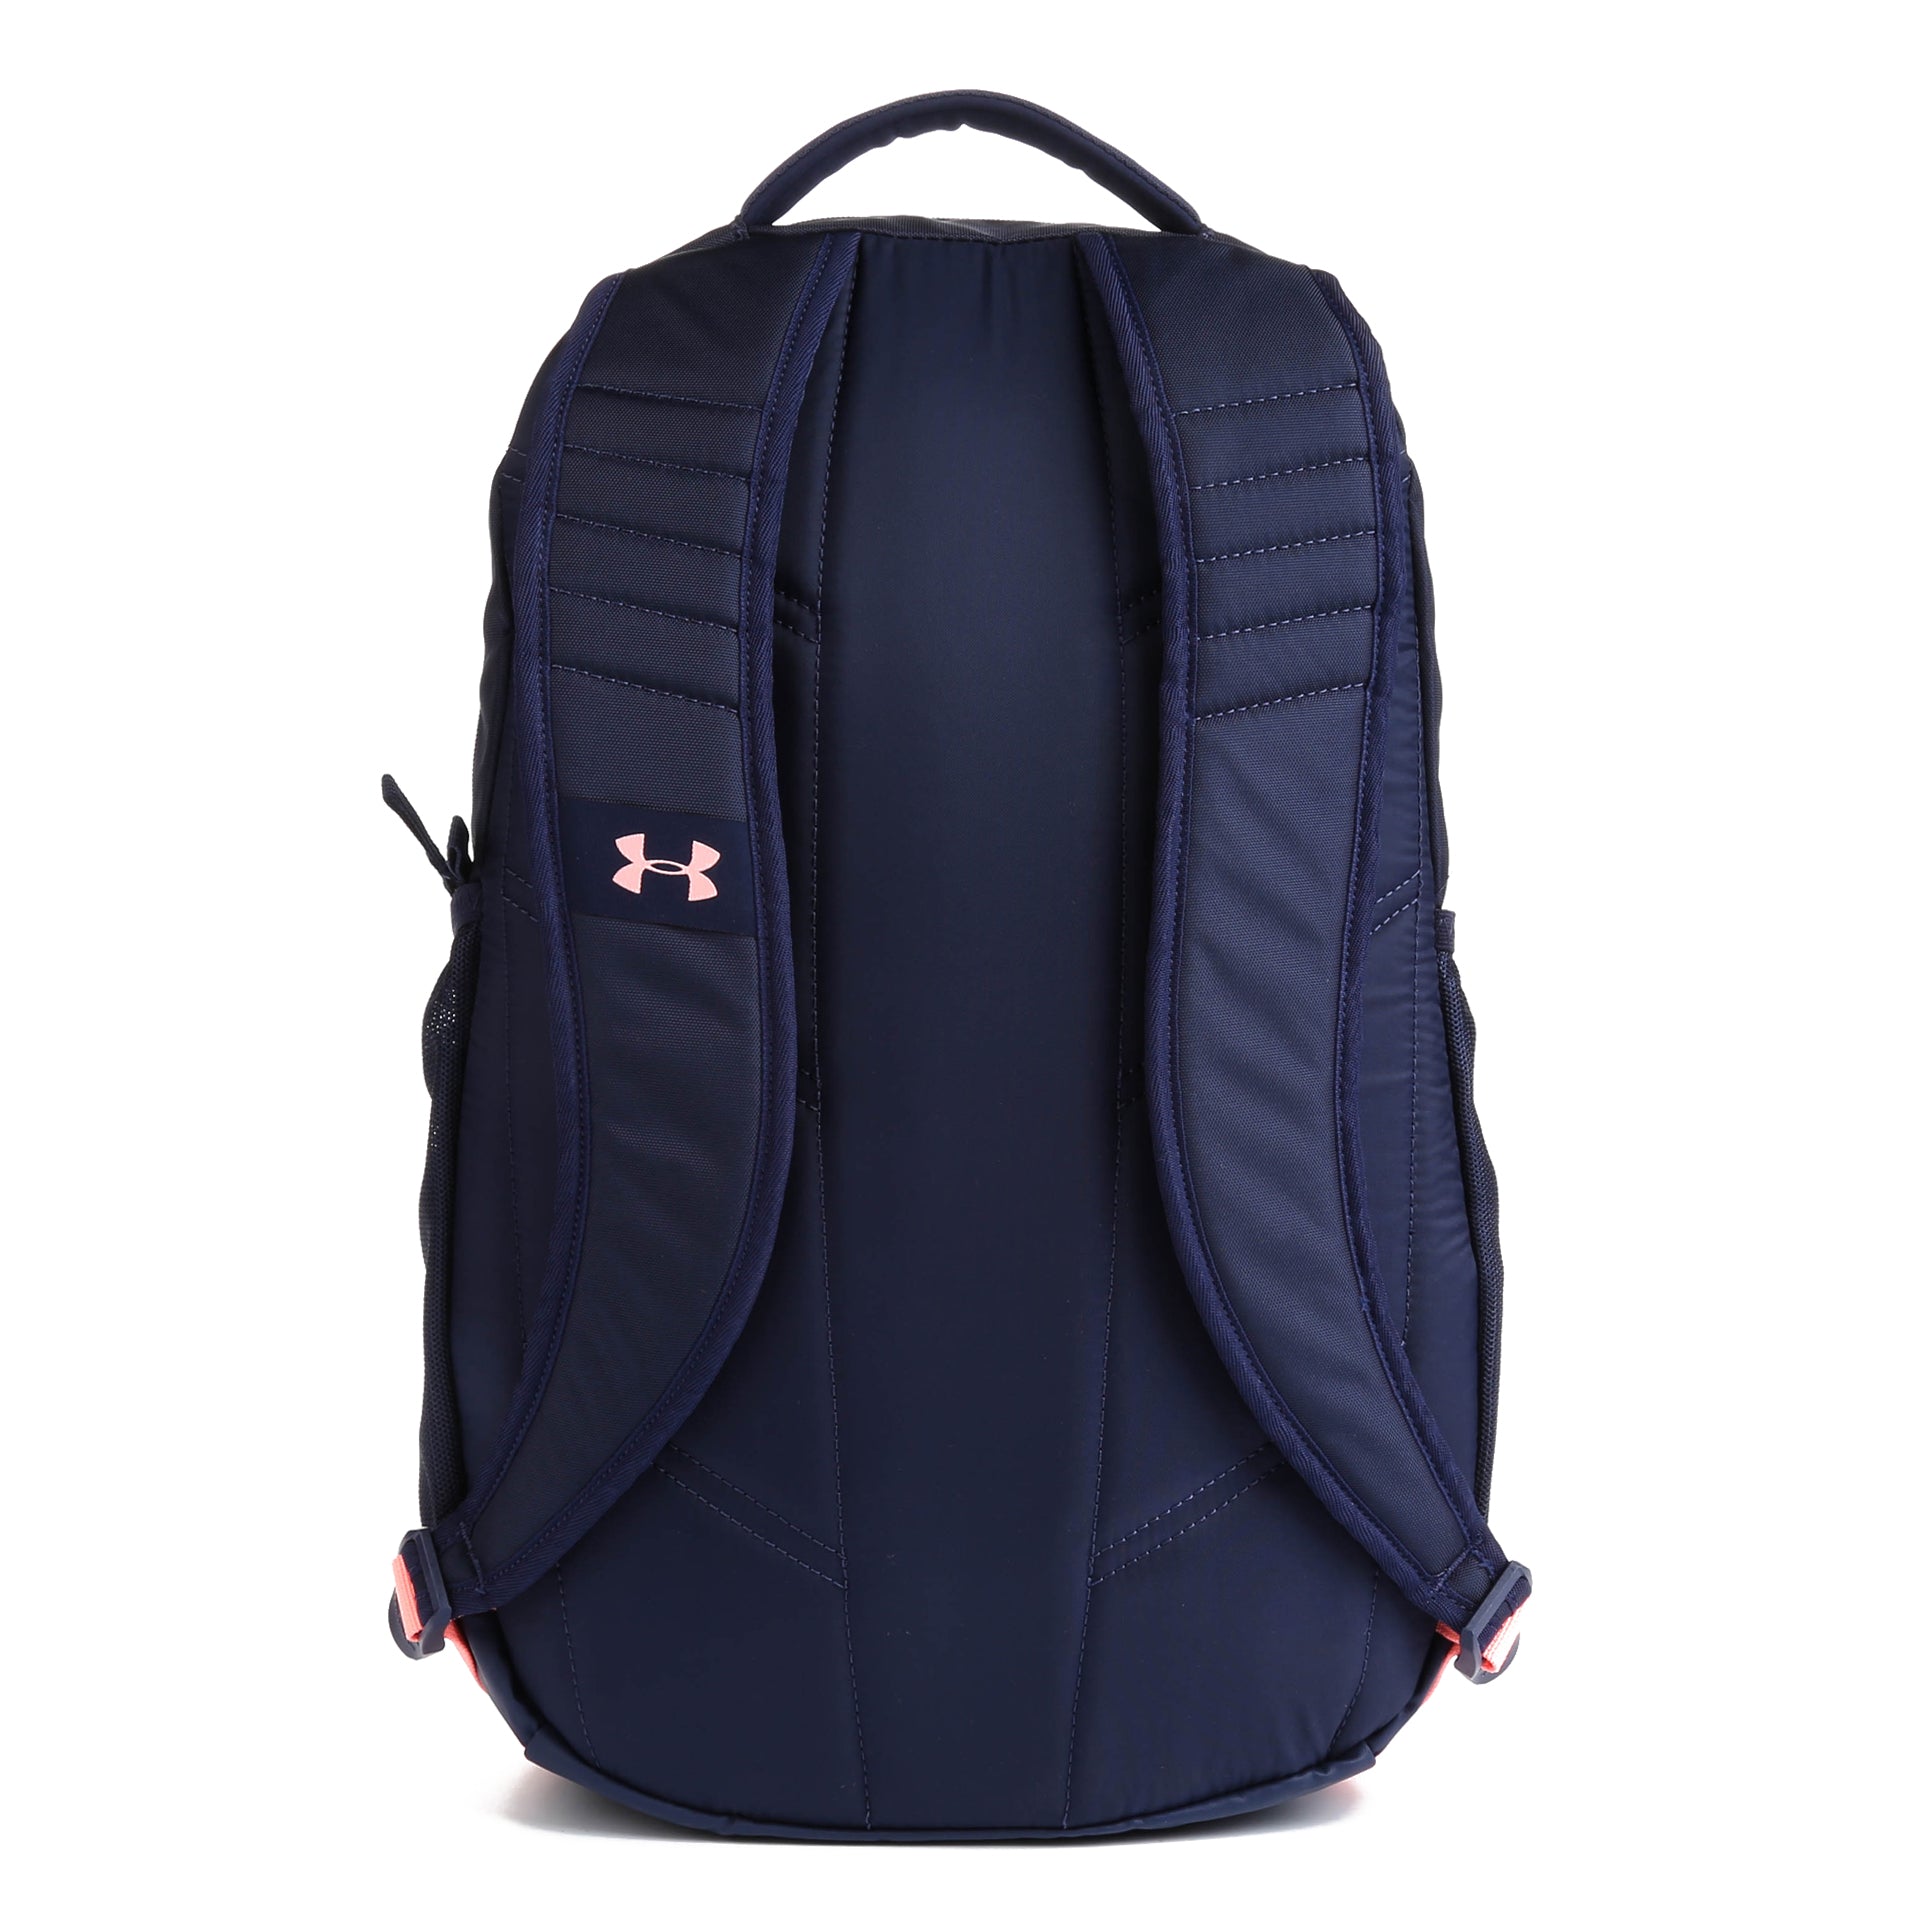 Under Armour Hustle 3.0 Backpack - Midnight Navy - New Star